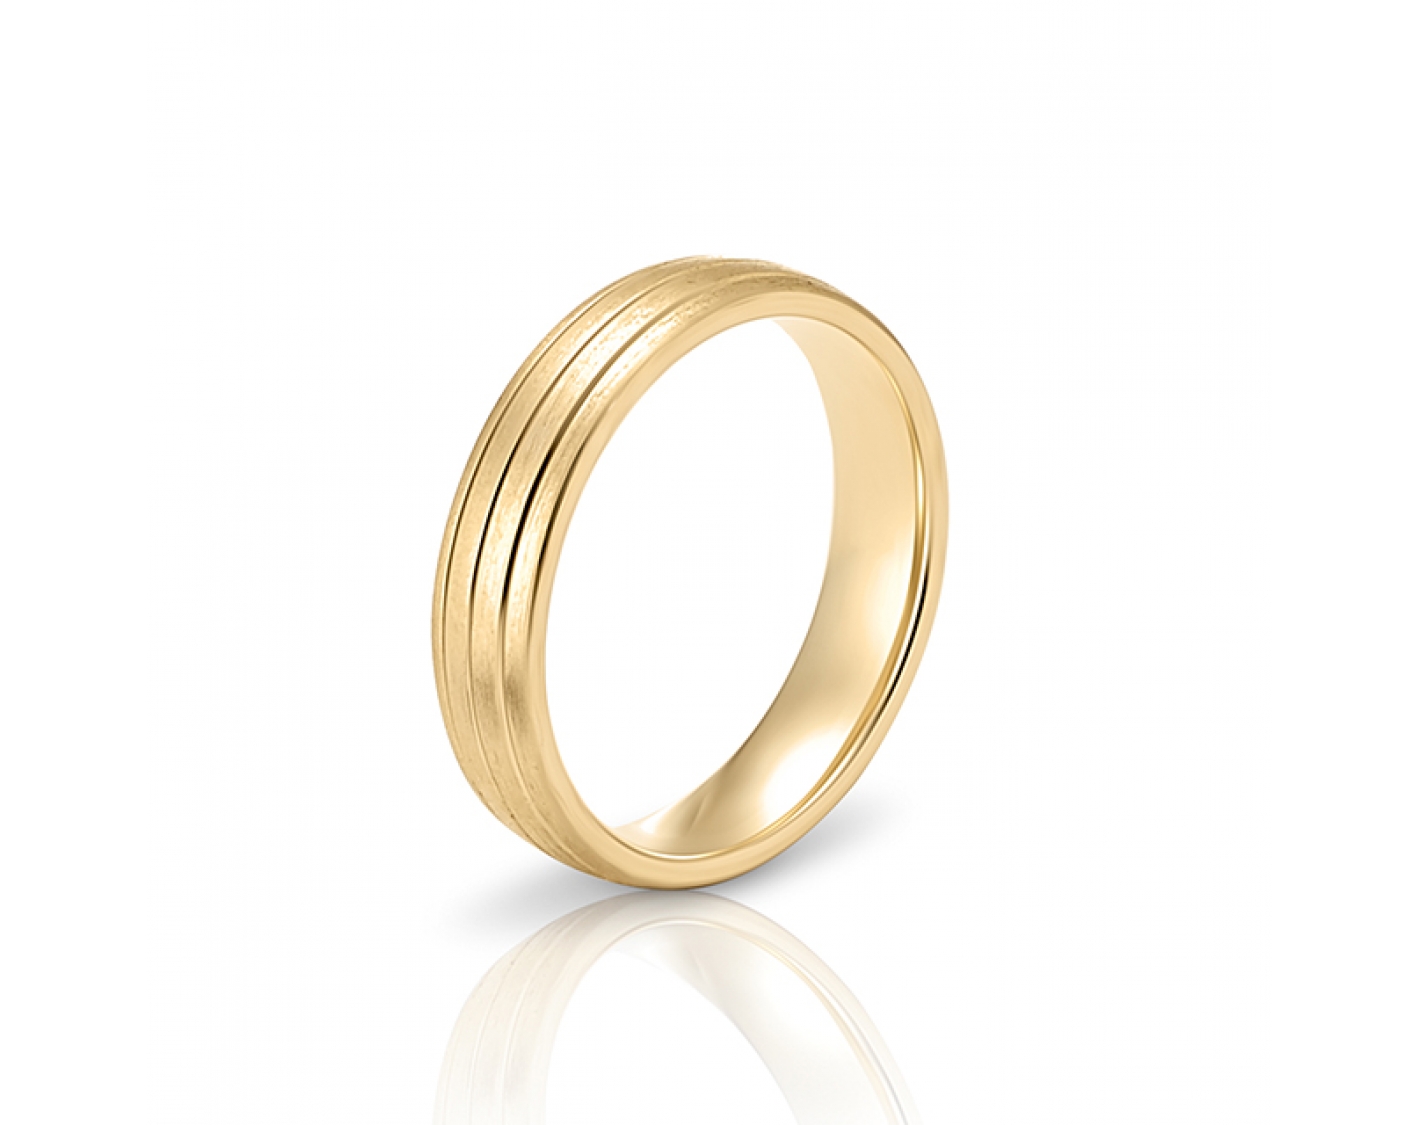 18k yellow gold 5mm matte wedding band with shiny inlays